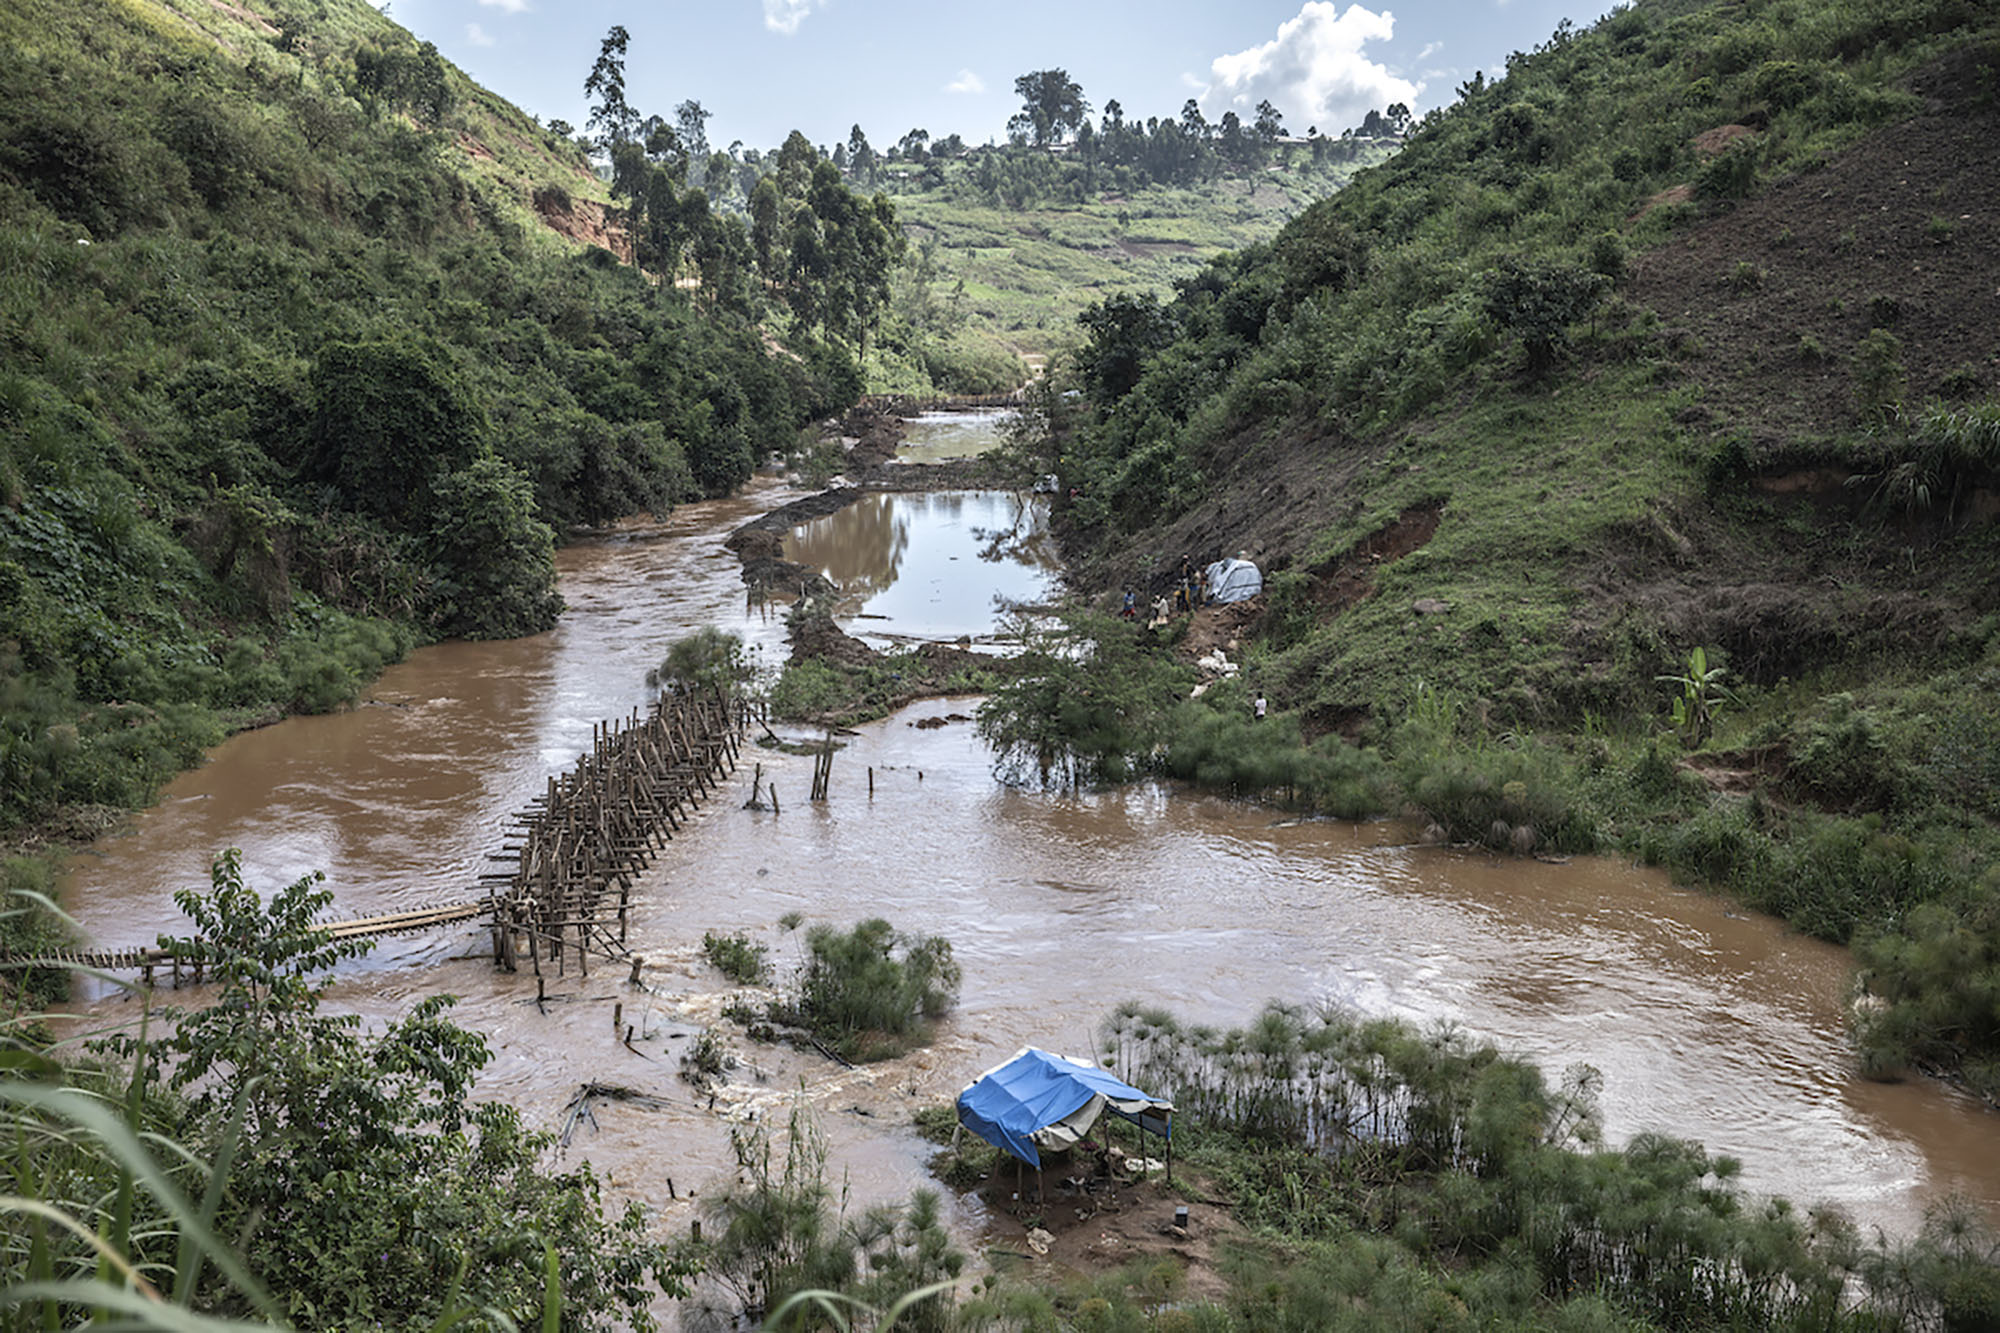 Iga Barrière, Ituri Province, May 2021.A Diverted Riverbank Gold Mine After Heavy Rain Led To The Mine Being Flooded Overnight. © Finbarr O'reilly For Fondation Carmignac